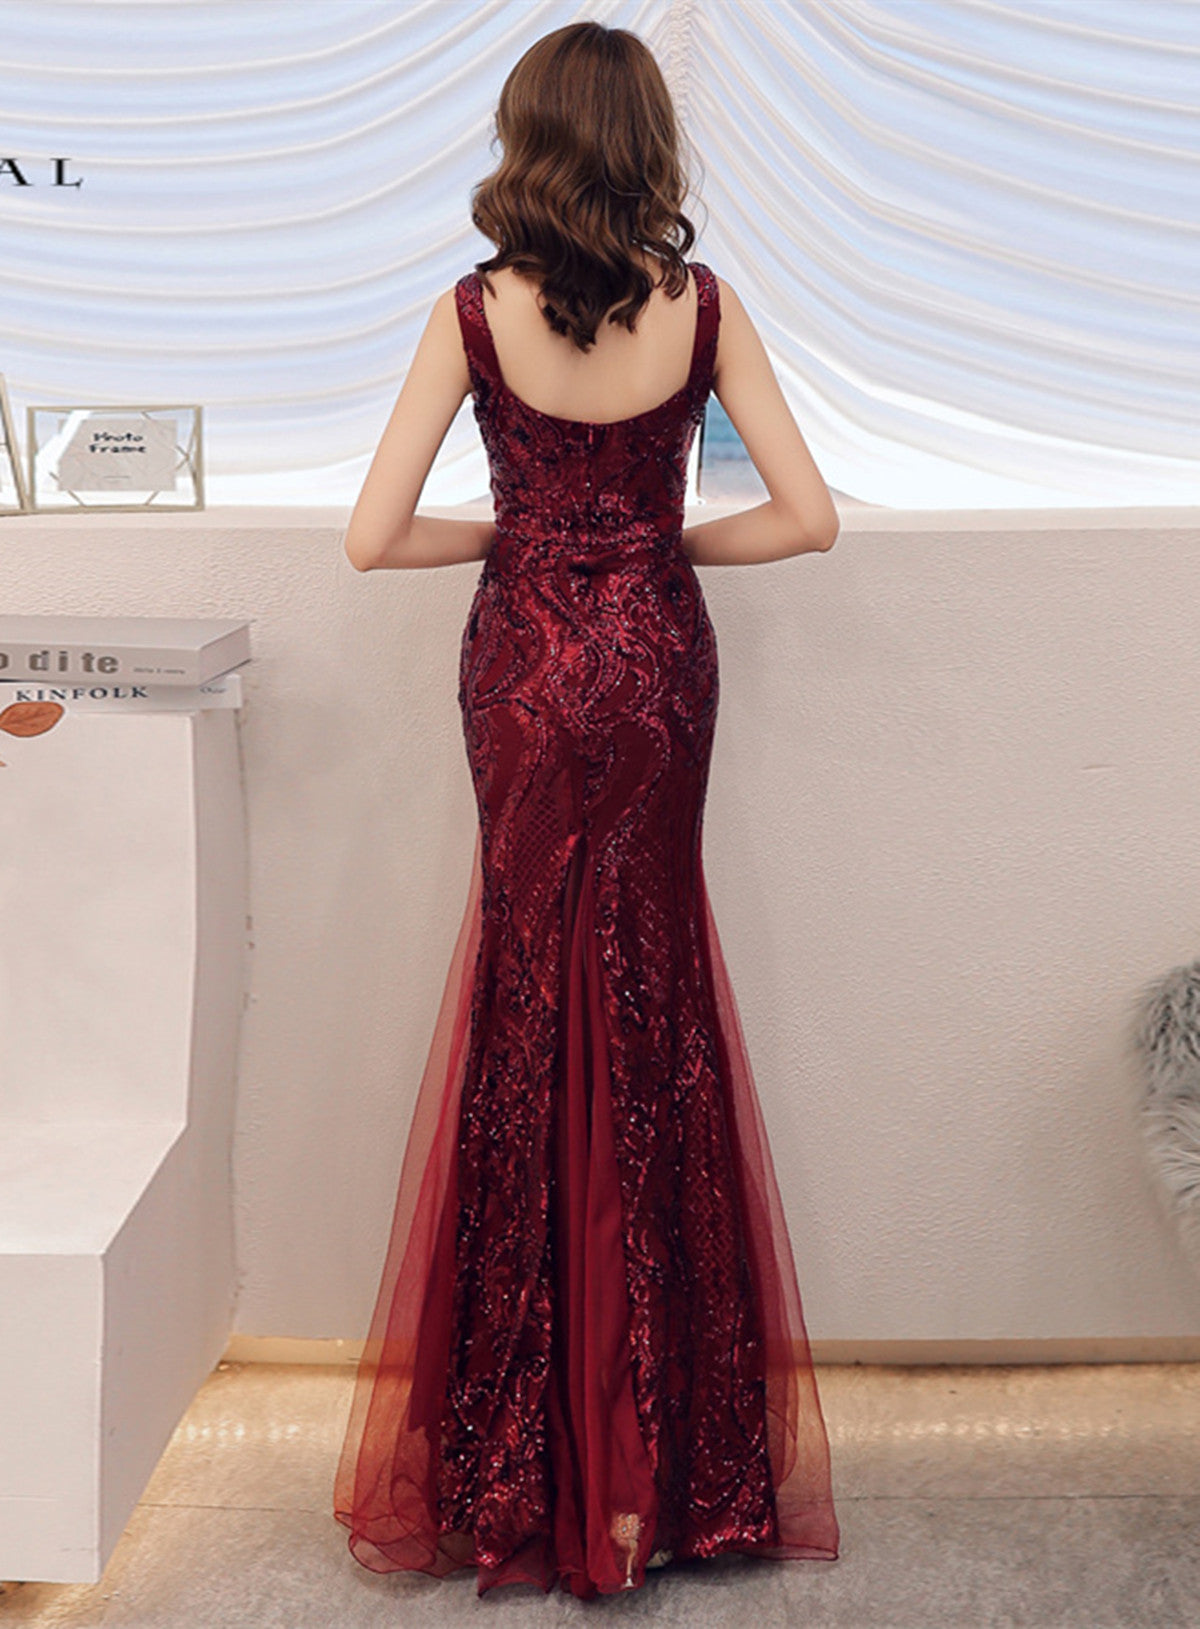 Lovely Sequins Mermaid Tulle and Sequins Party Dress, Wine Red Prom Dress